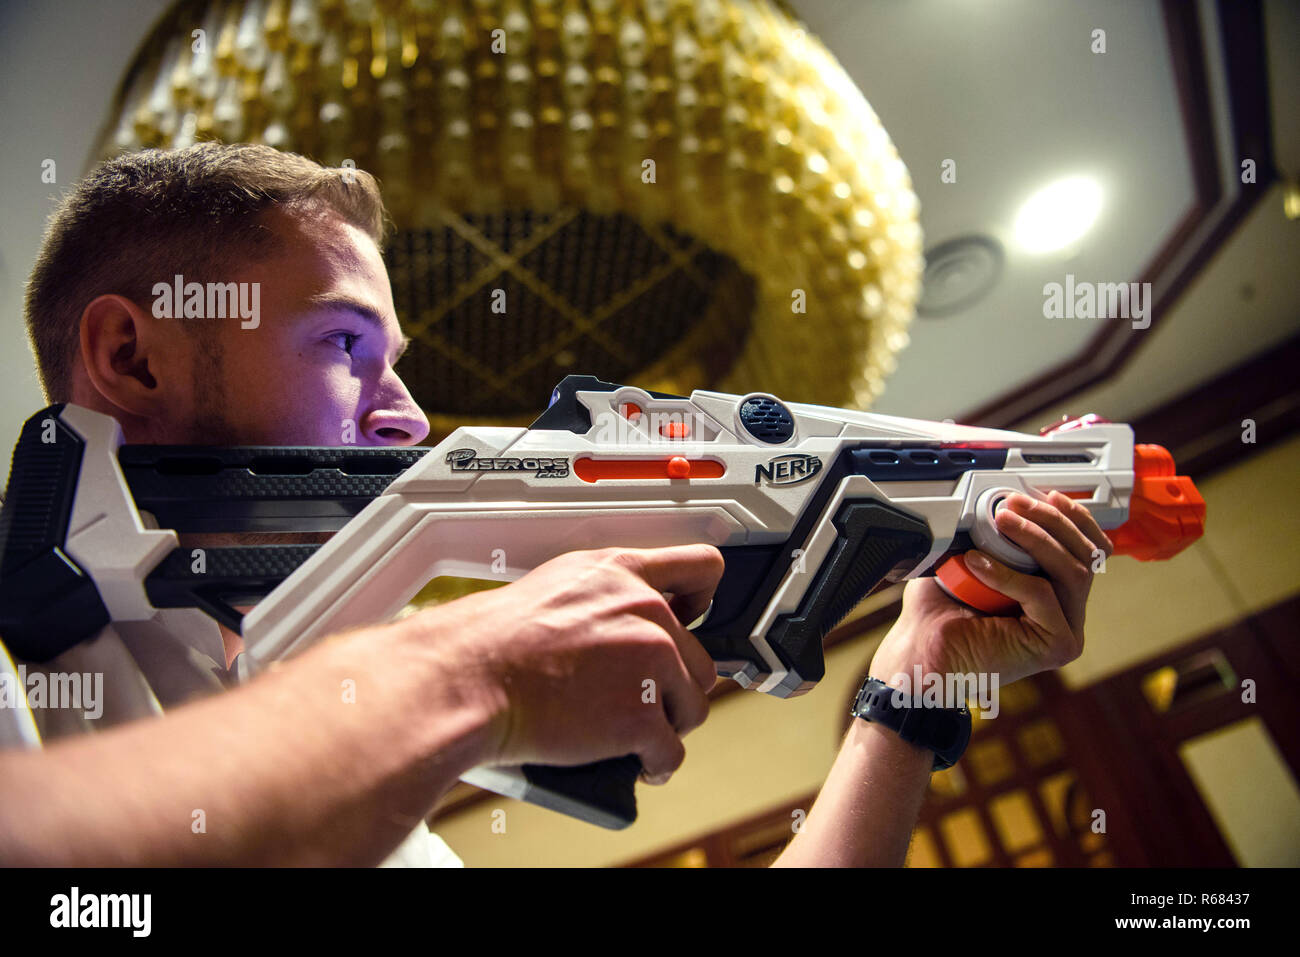 04 December 2018, Bavaria, Nürnberg: Johannes demonstrates a NERF Laser OPs  Pro Blaster from Hasbro Deutschland GmbH. The toy industry reported on  expectations and trends at a press conference. Photo: Nicolas Armer/dpa